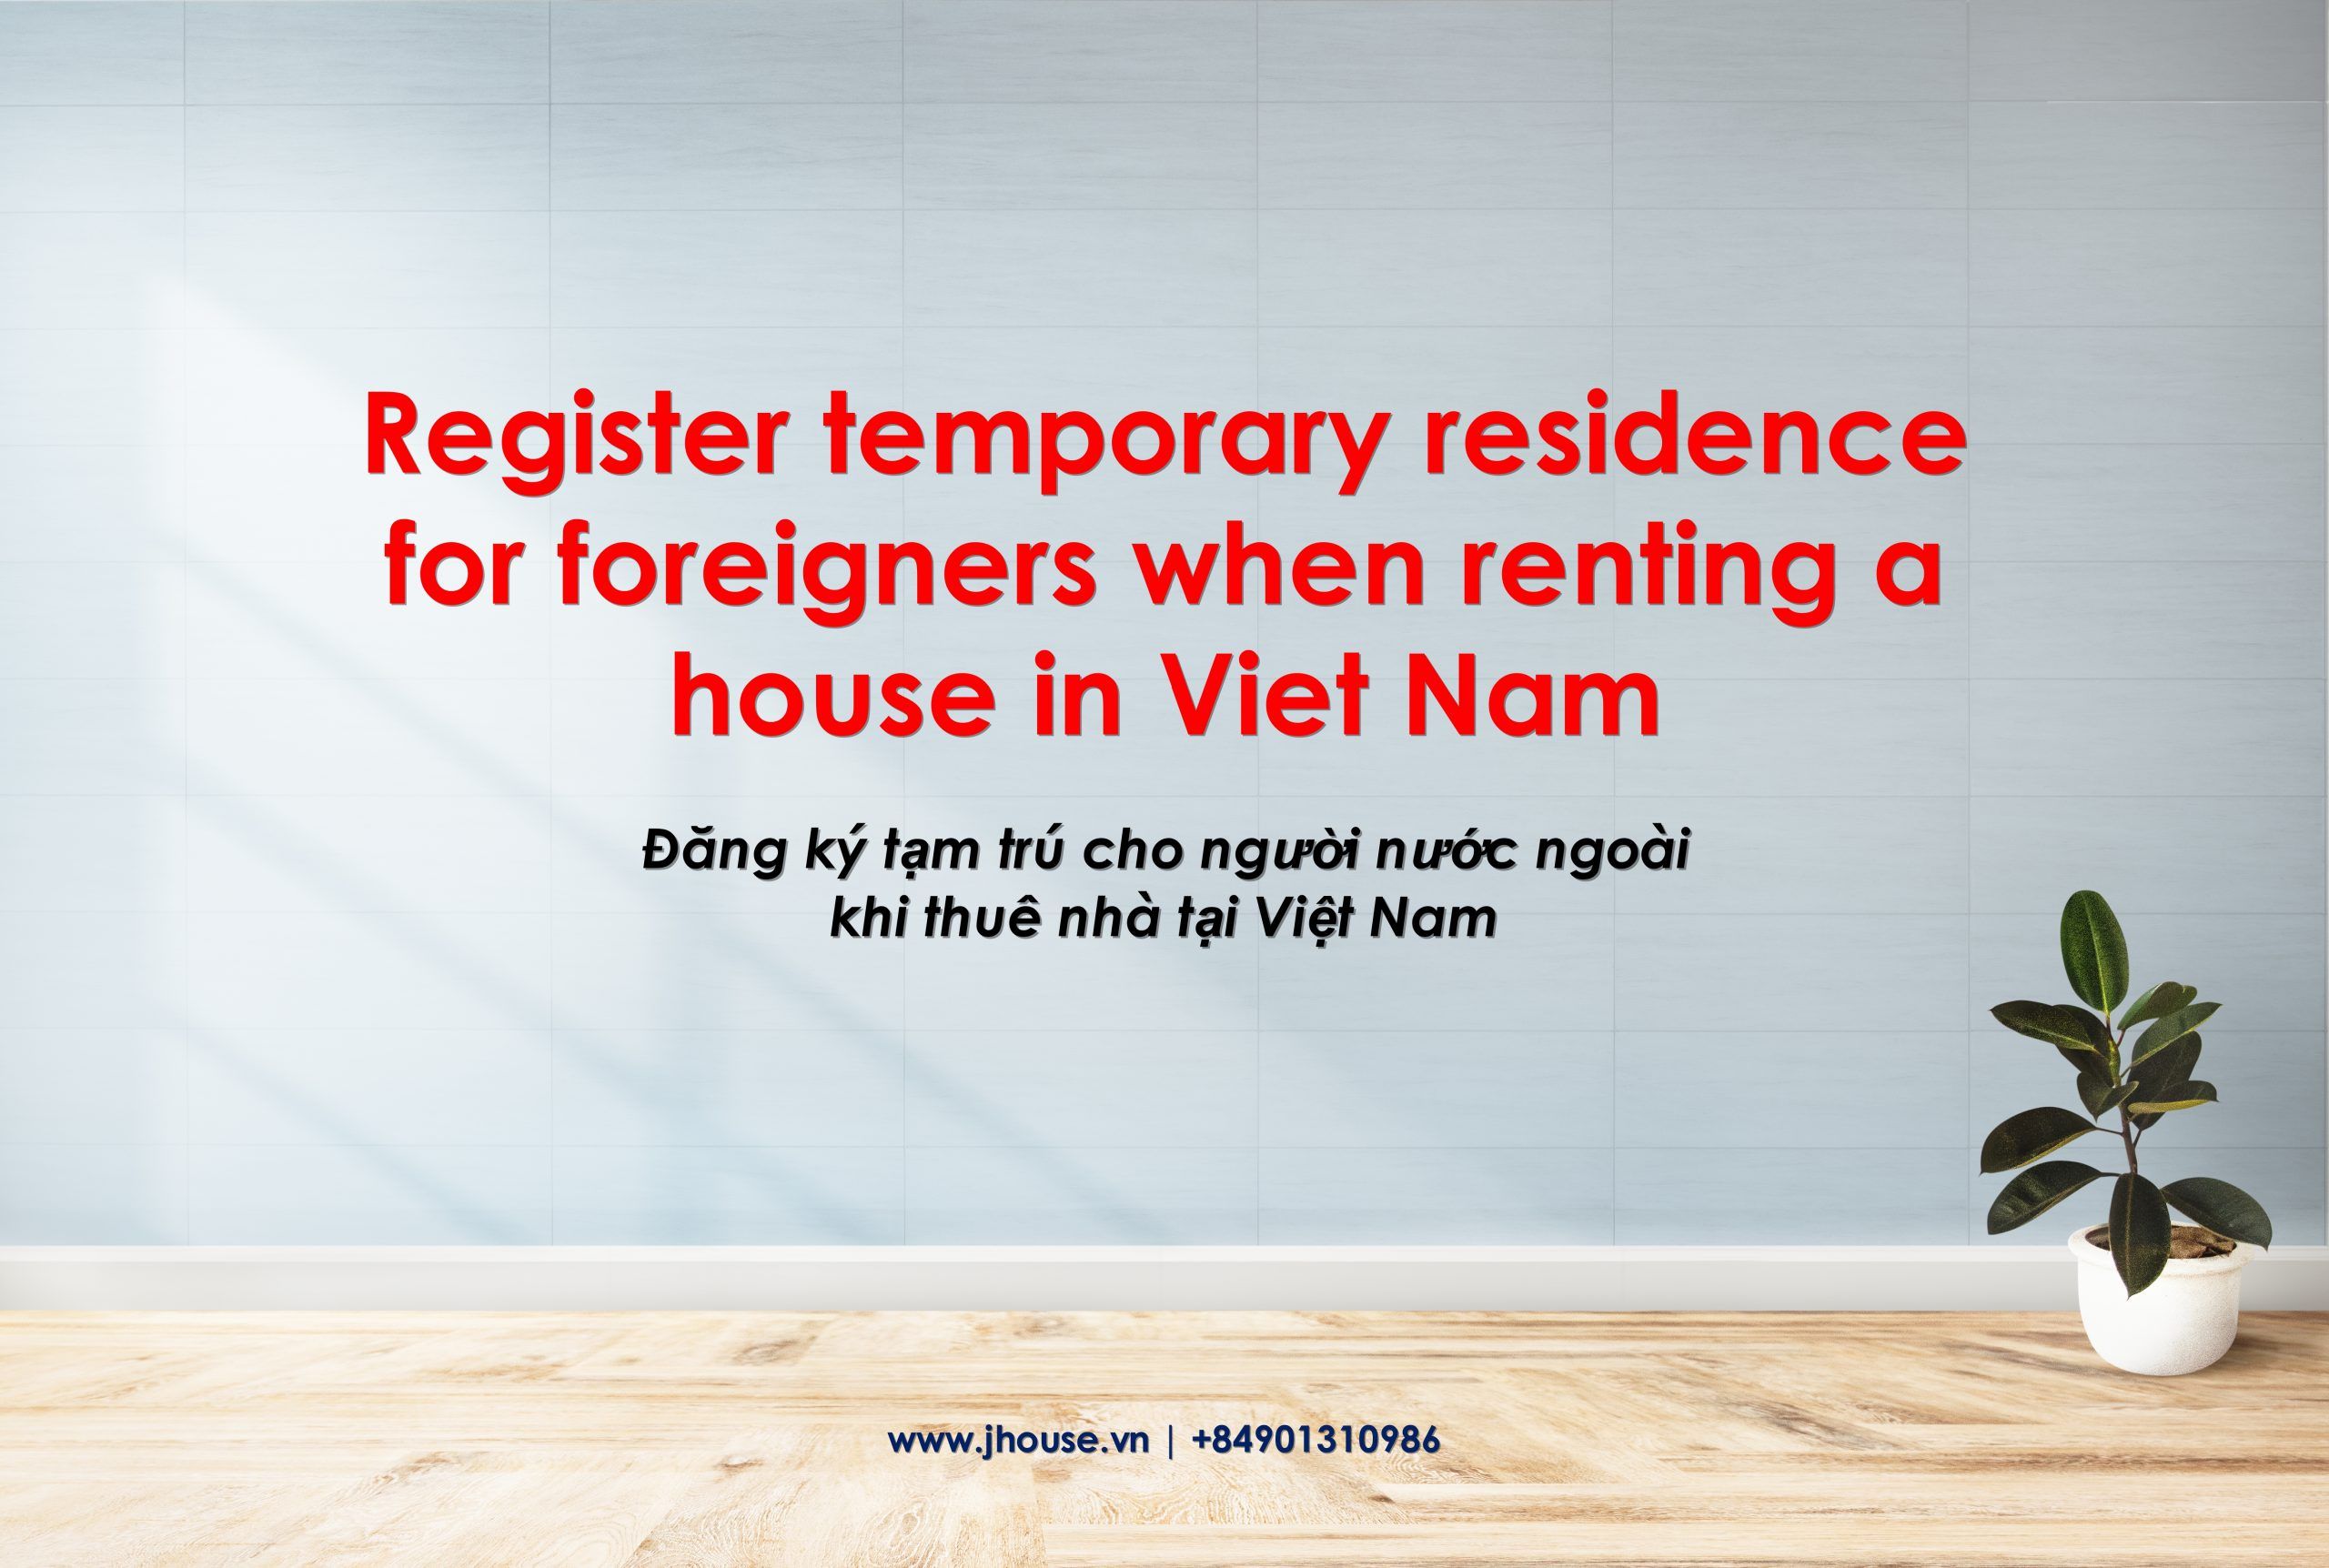 Register temporaty Residence for foreigners in VietNam scaled